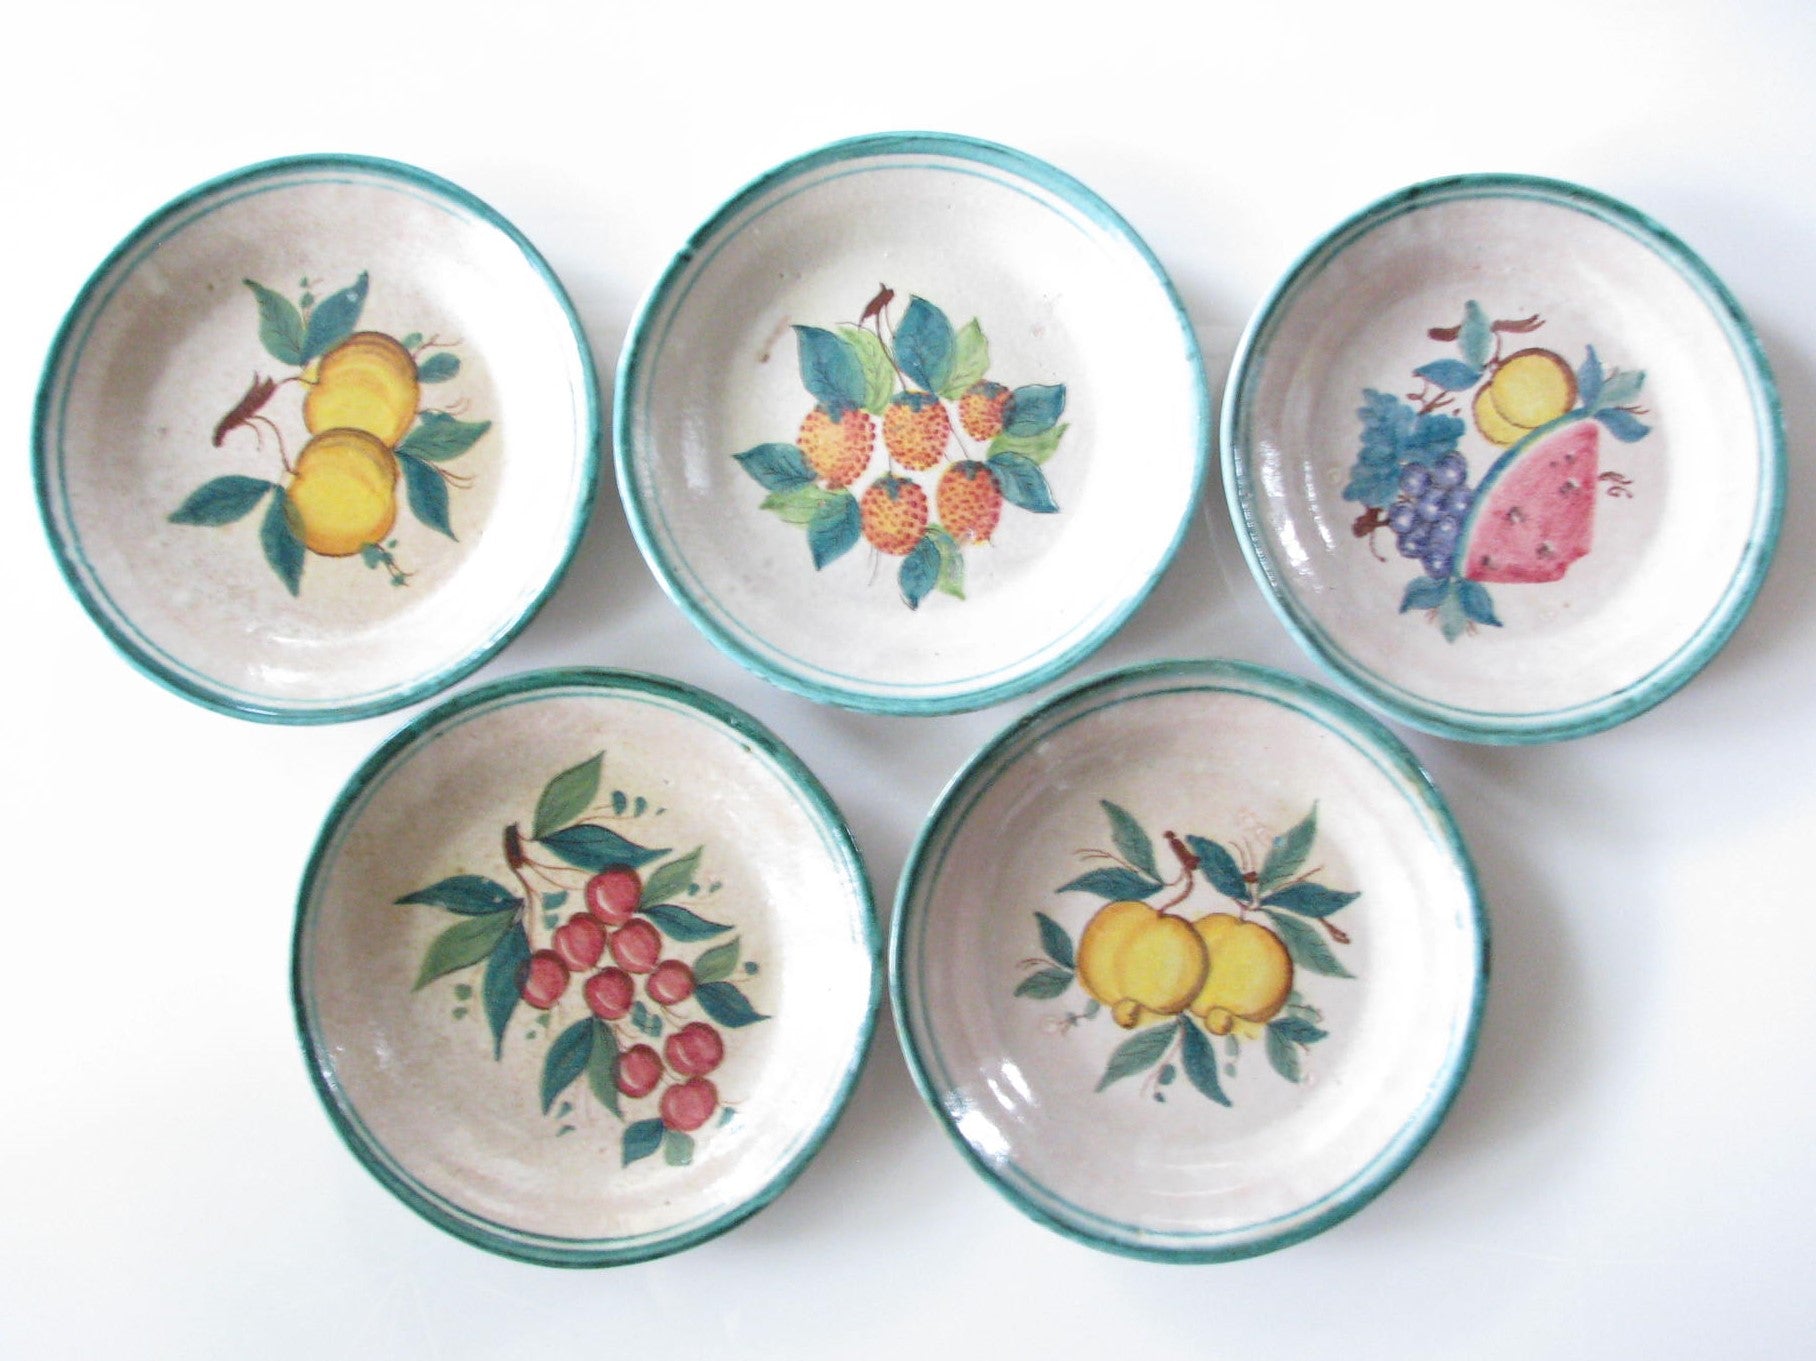 edgebrookhouse - Vintage Rustic Glazed Terracotta Bowls with Fruit Designs Made in Italy - Set of 5